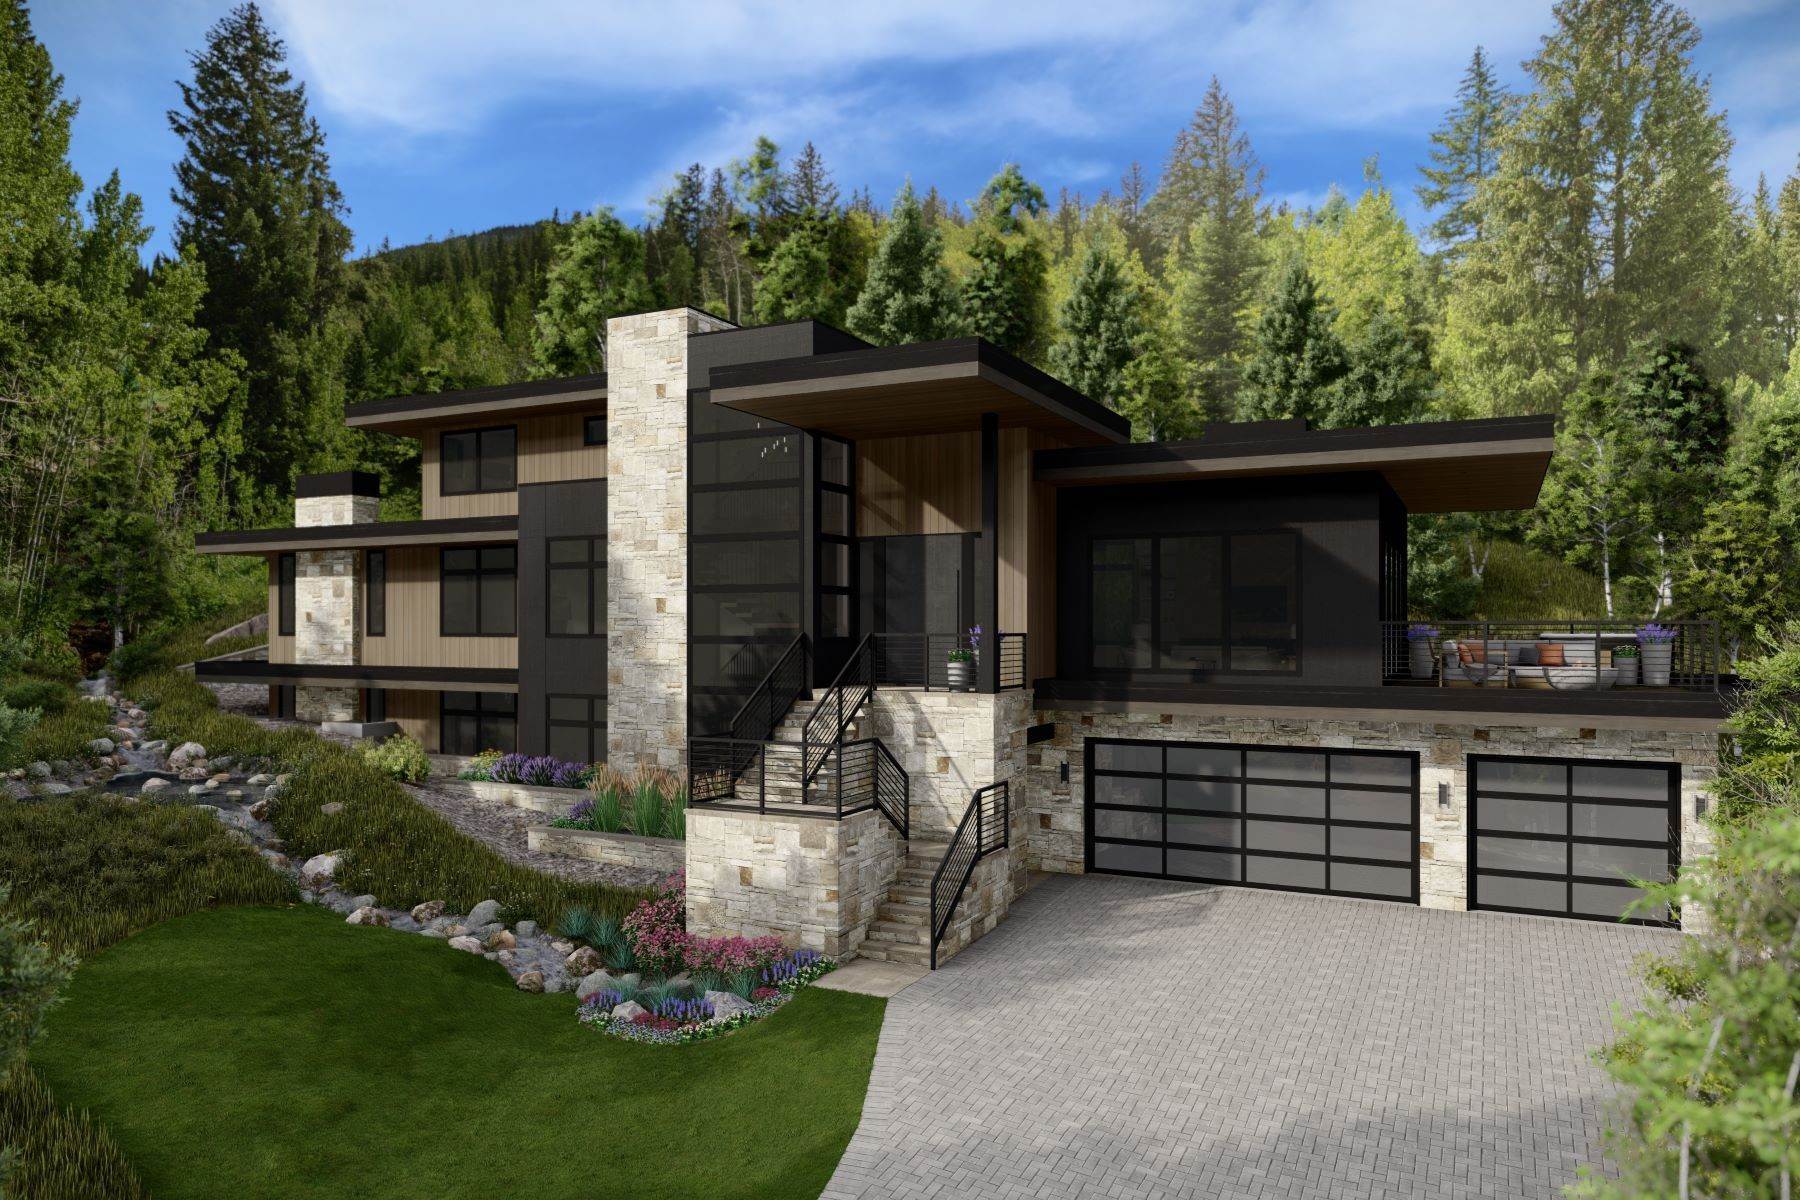 Single Family Homes for Active at Backing up to national forest and with gorgeous views 5002 Snowshoe Lane Vail, Colorado 81657 United States